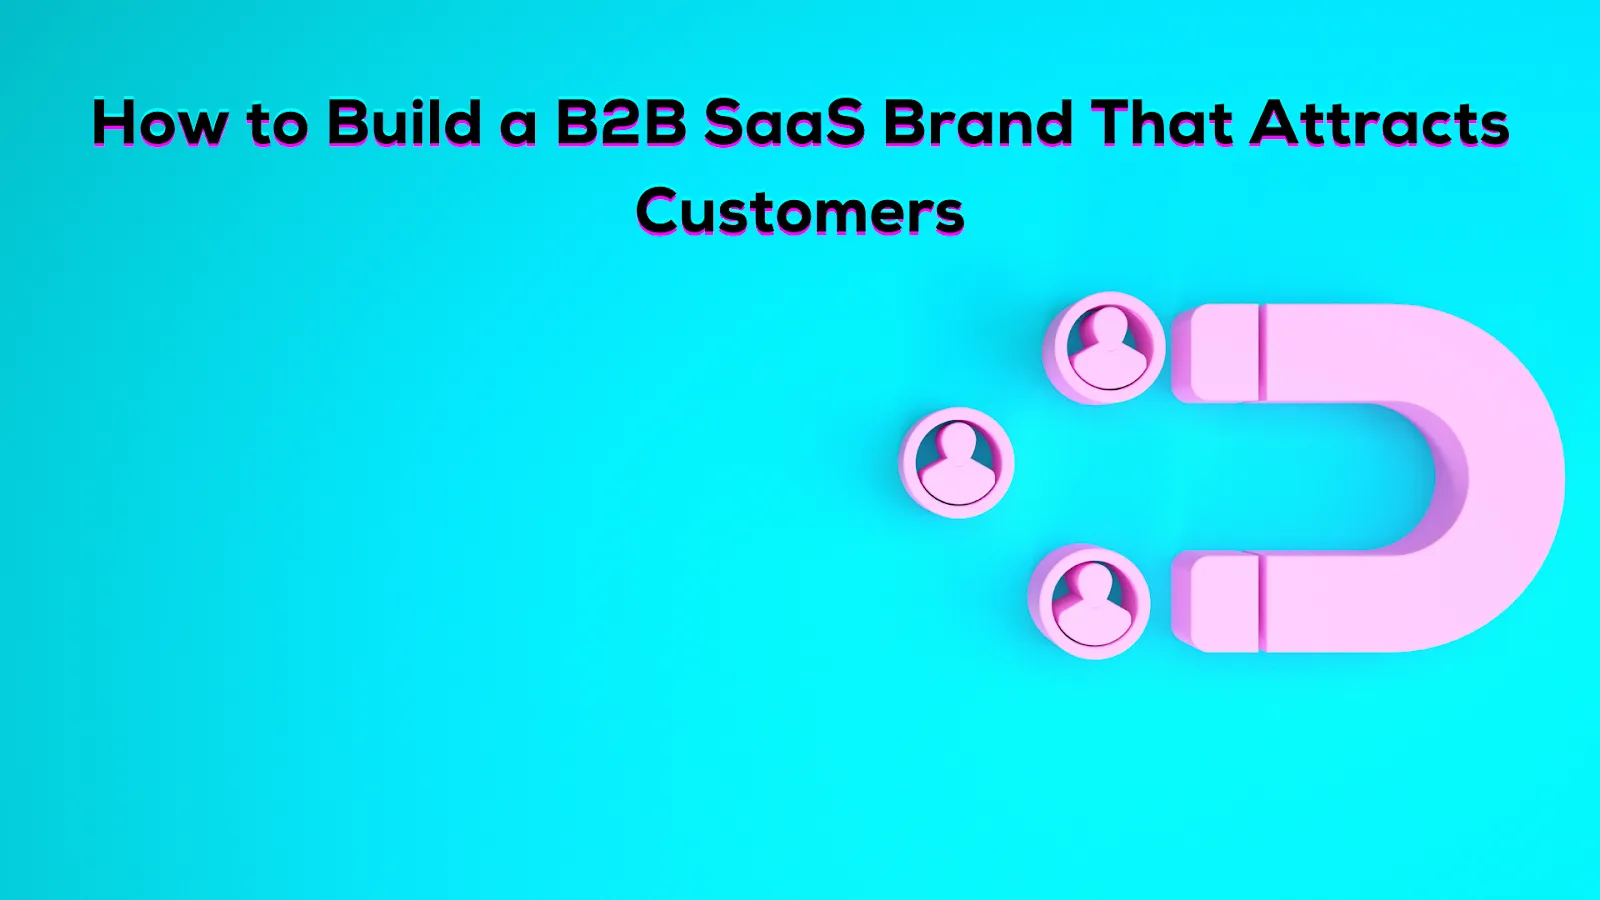 How to Build a B2B SaaS Brand That Attracts Customers